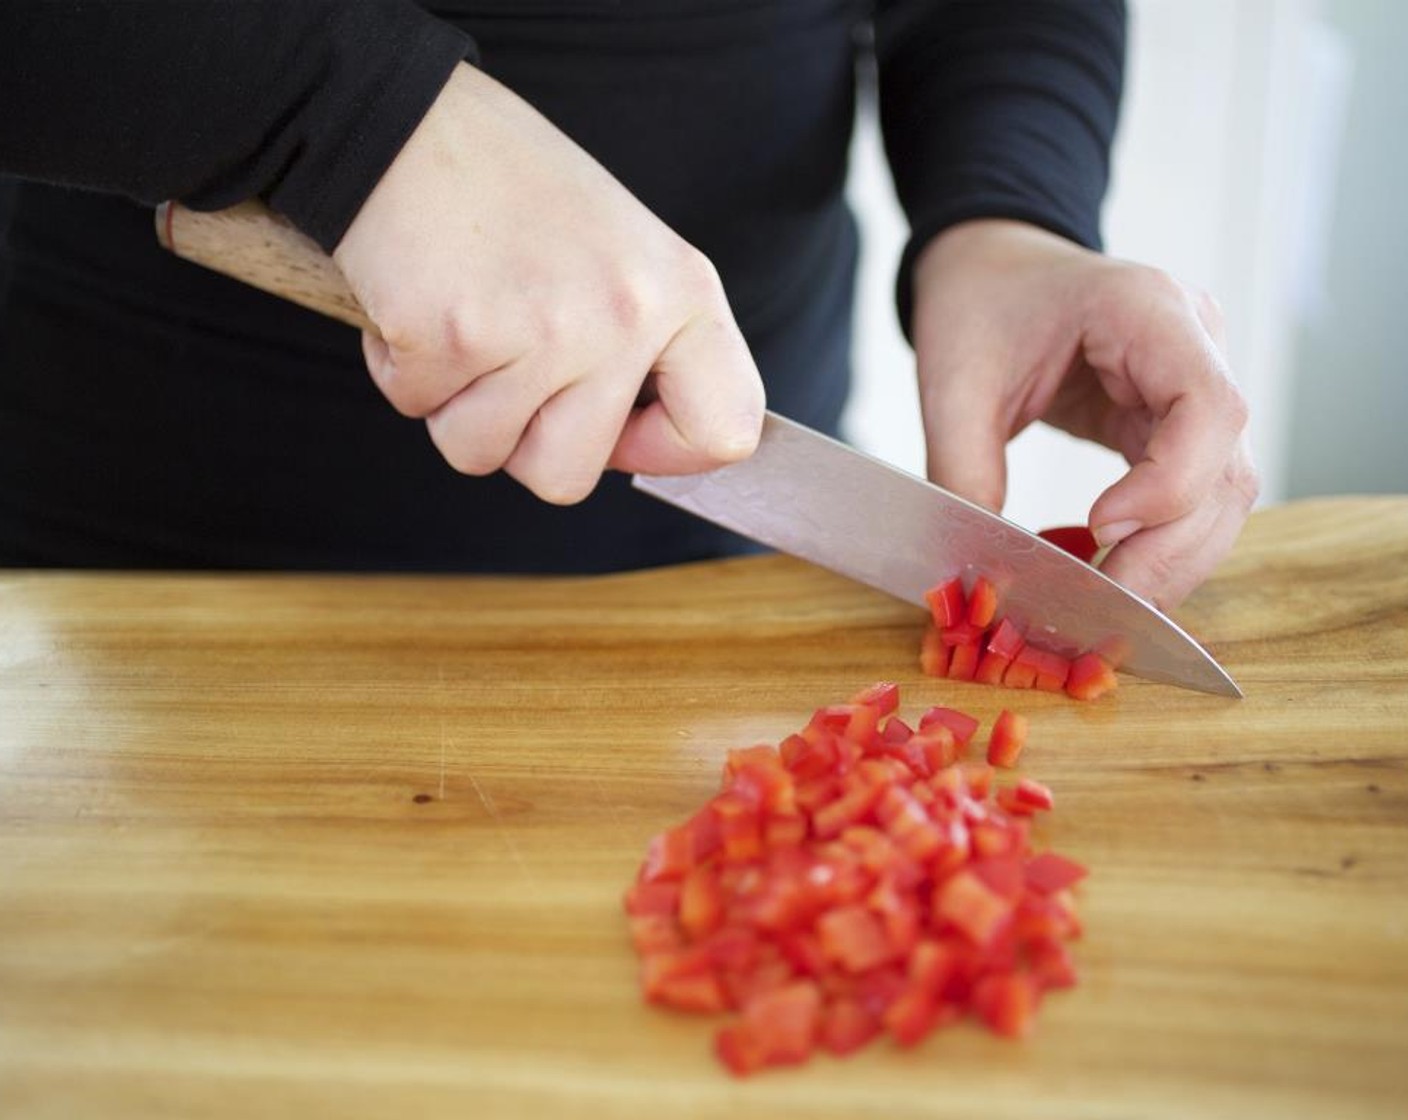 step 4 Discard the stem, pith and seeds of the Red Bell Pepper (1). Cut into 1/4 inch dice; add to bowl.